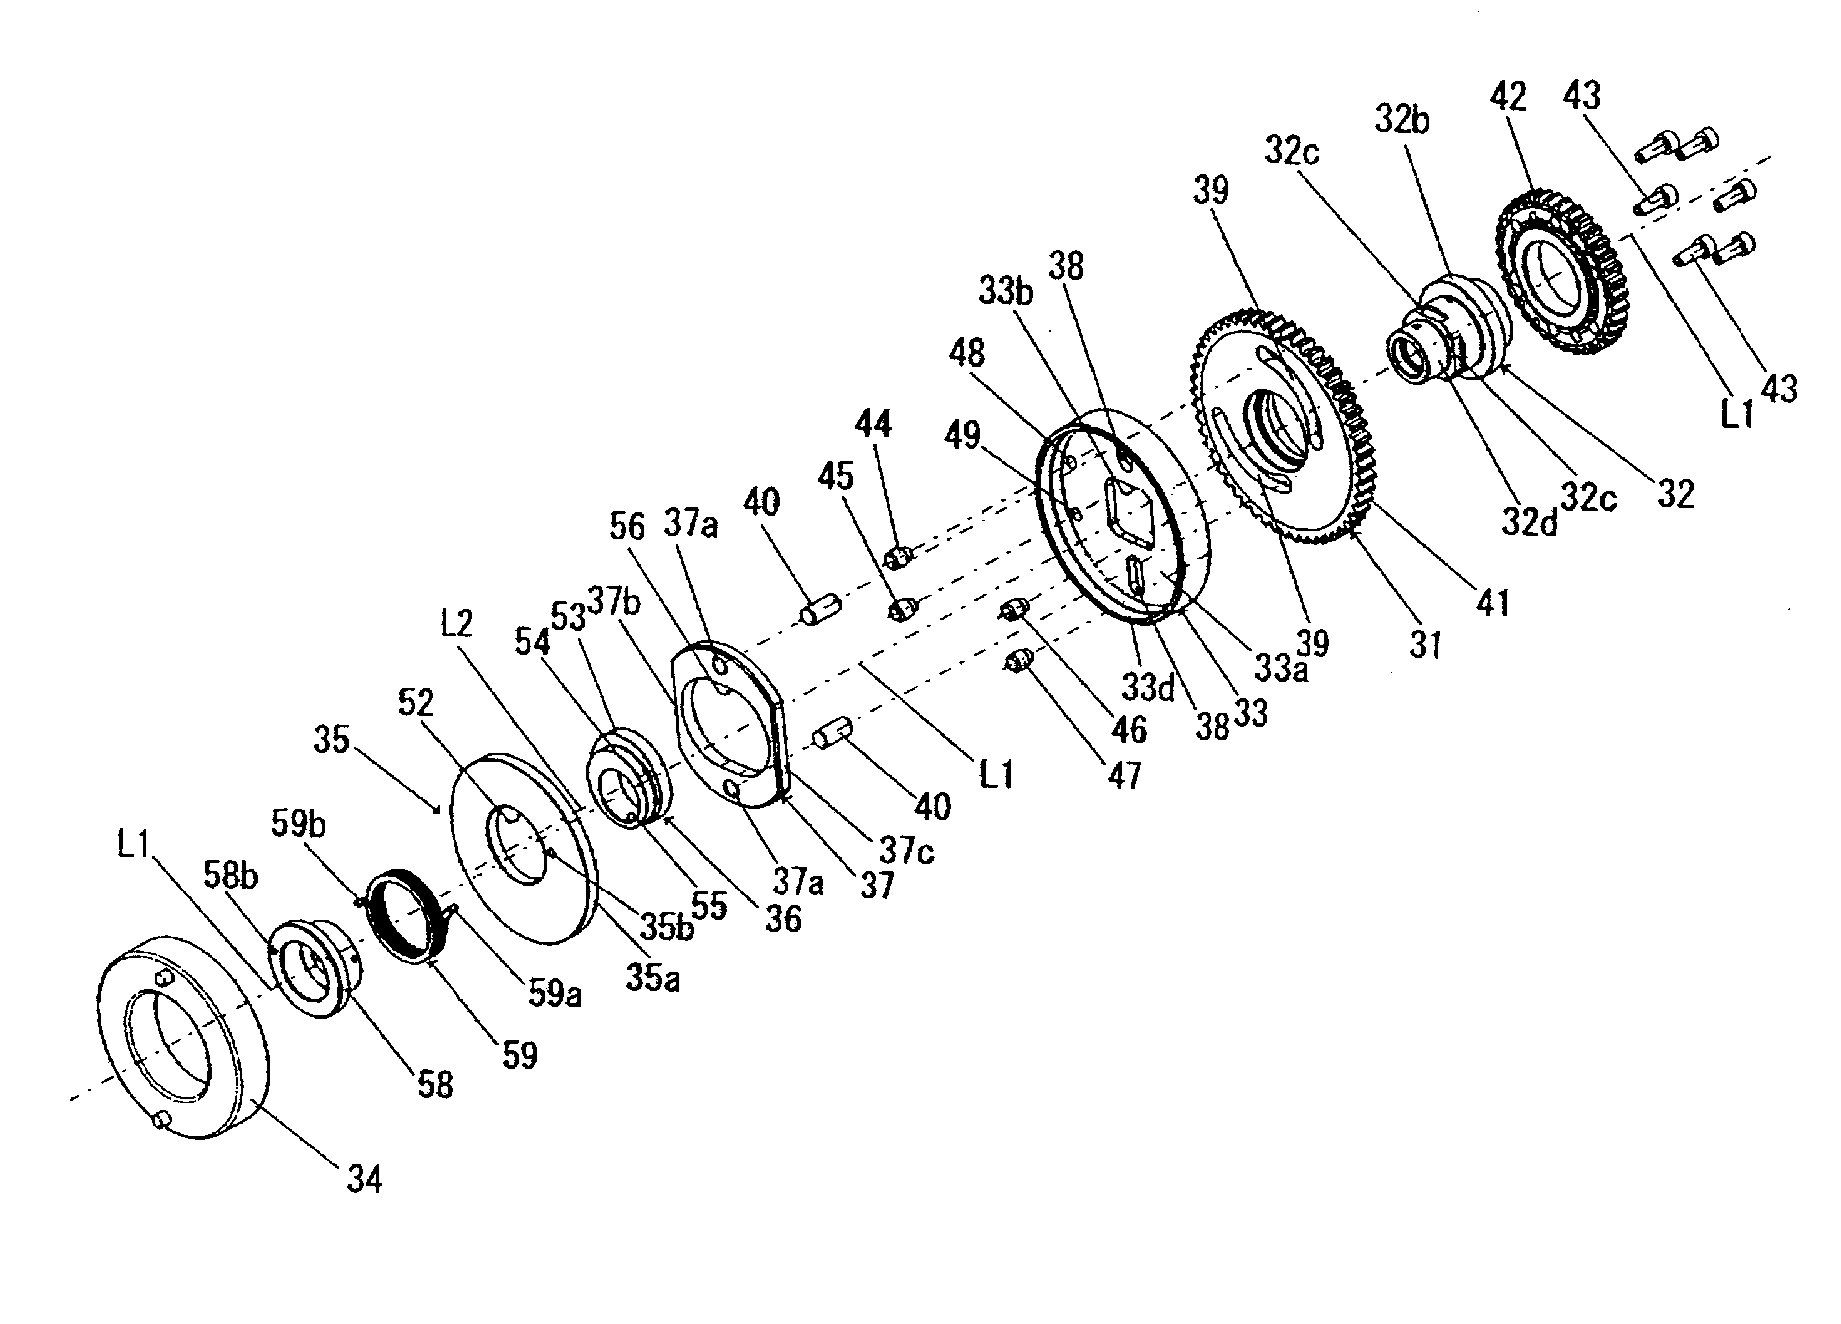 Phase variable device in car engine